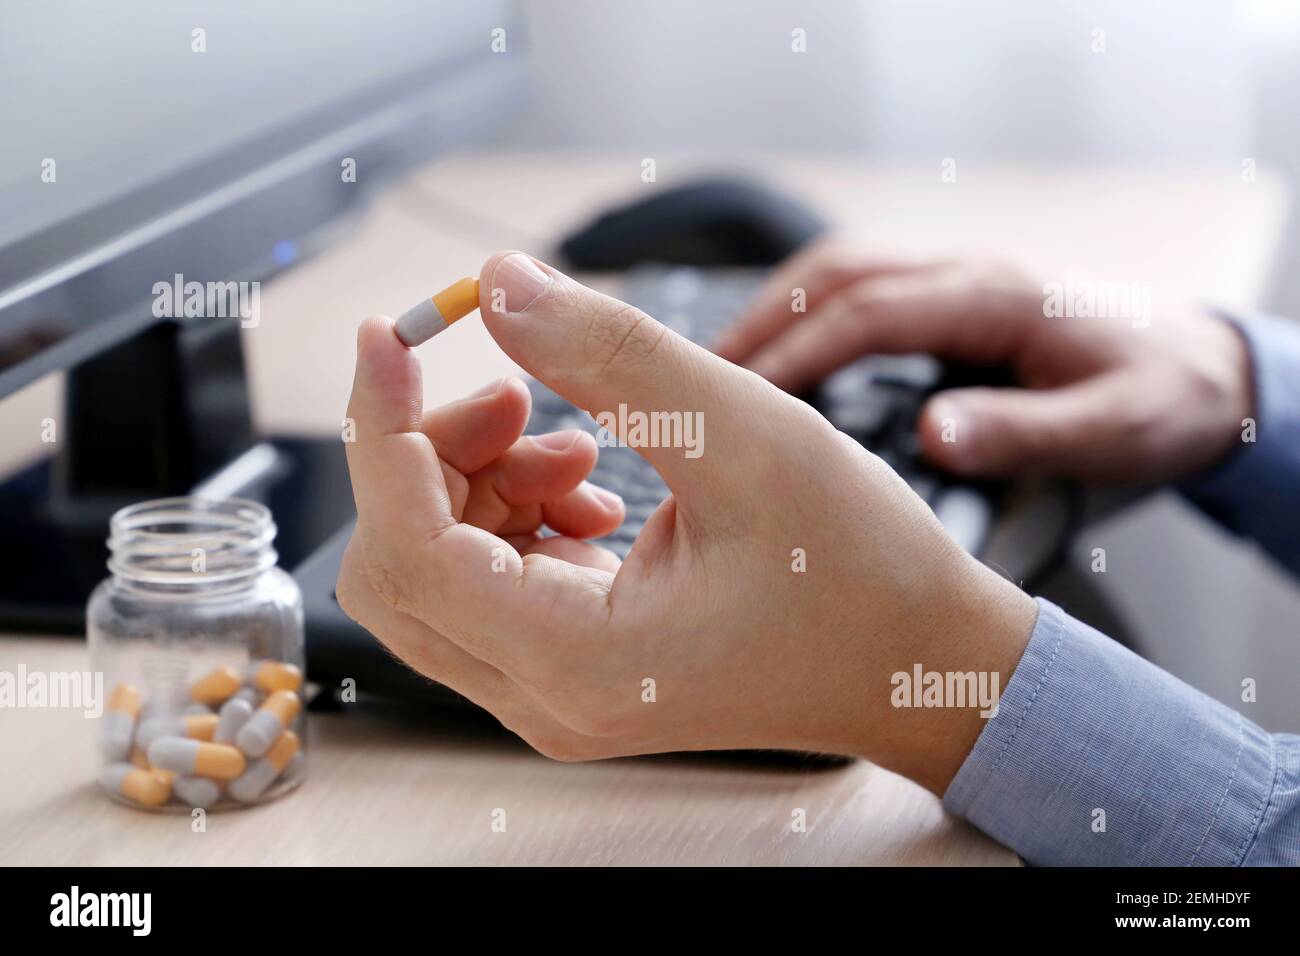 Medication in capsule in male hands on PC keyboard background. Man taking pill during work at office Stock Photo